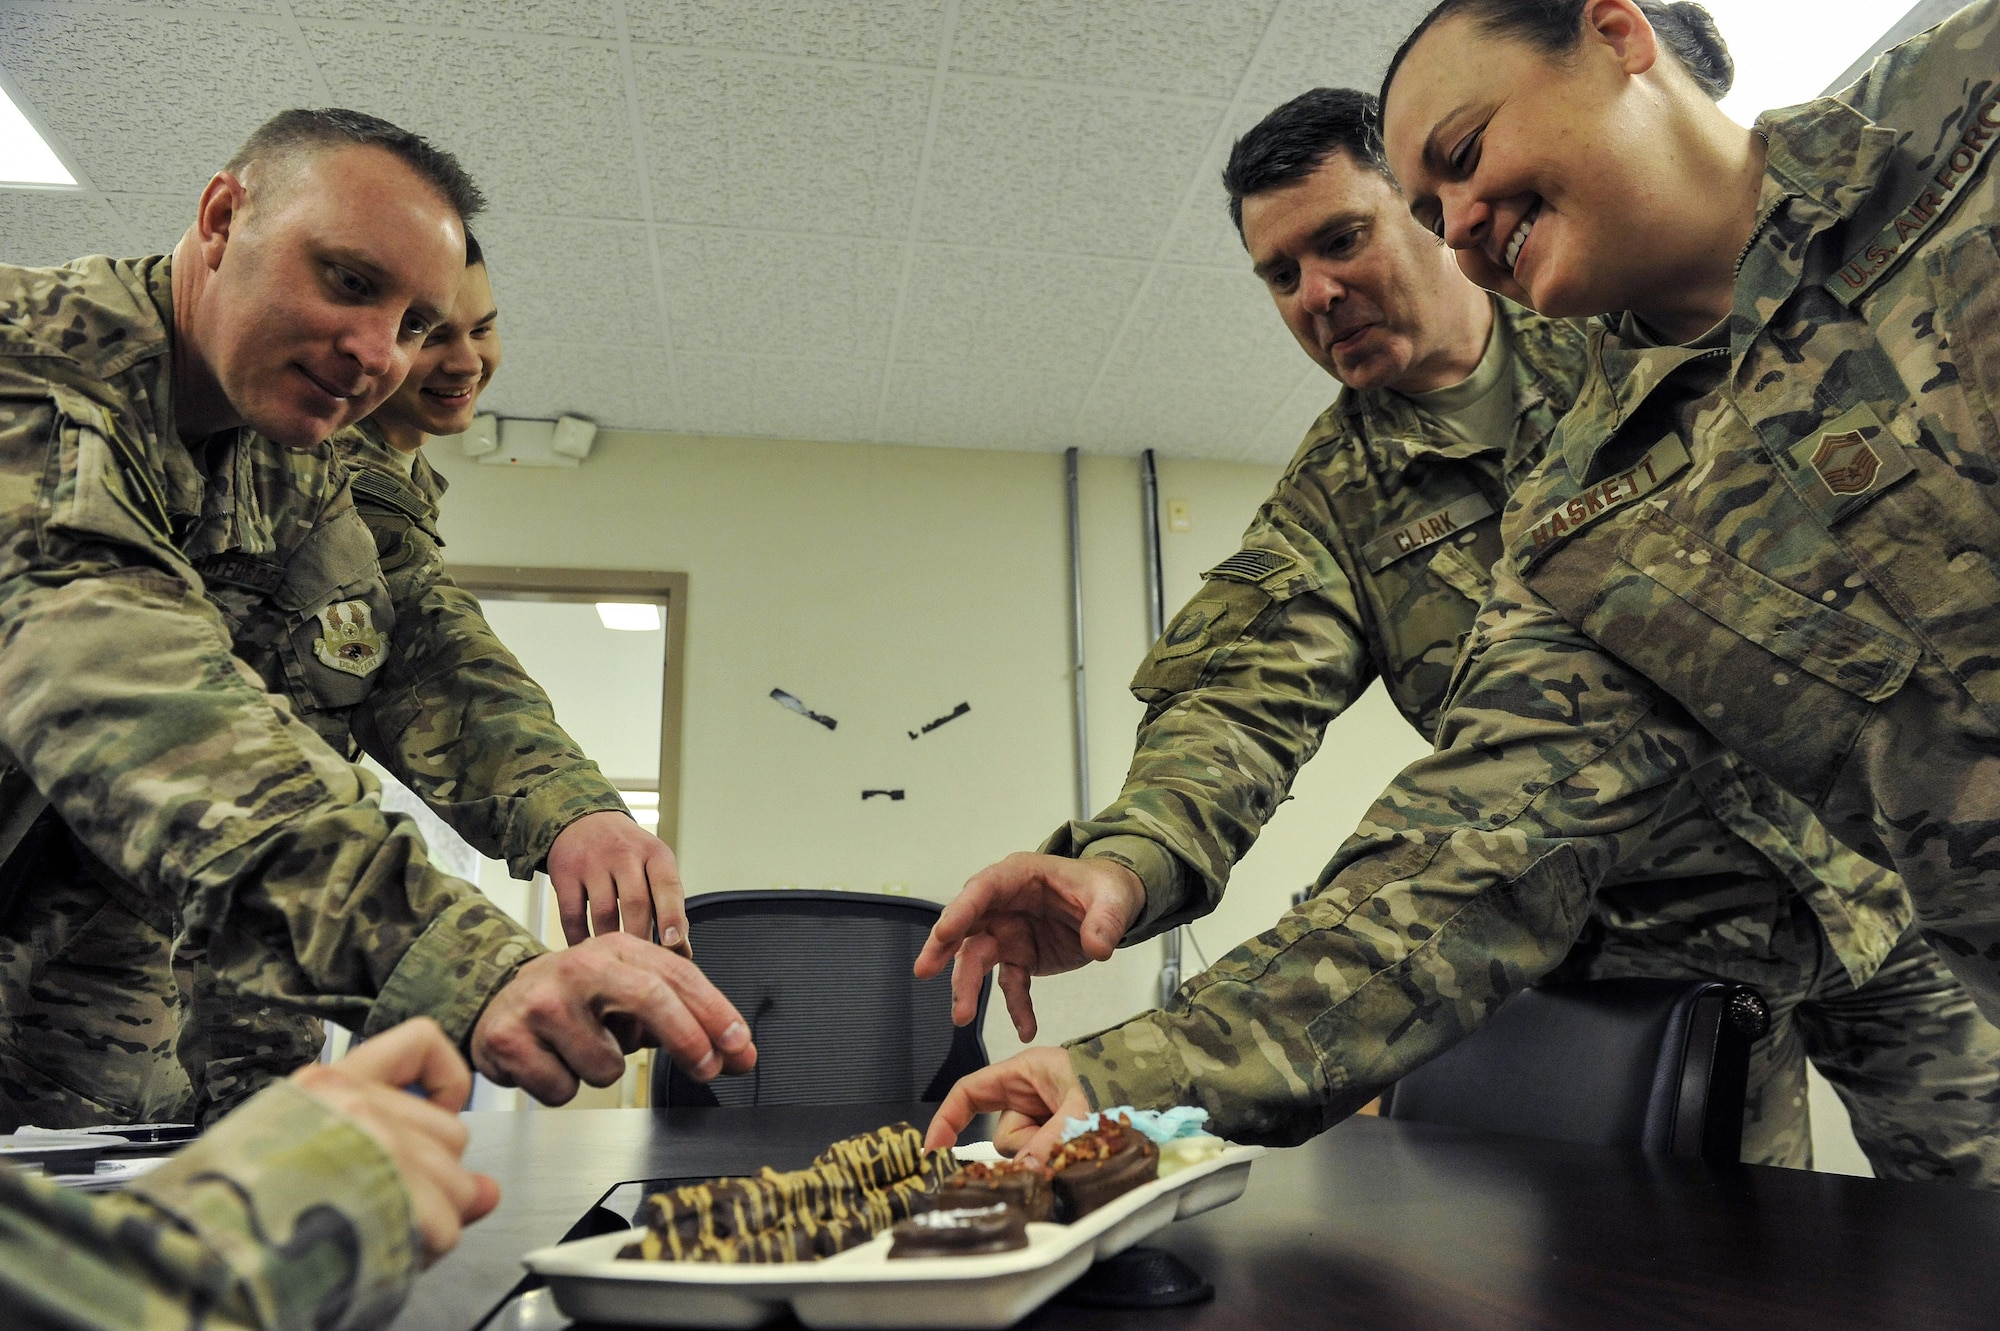 From left to right, Lt. Col. Johnathan Cartwright, 1st Lt. Amanda Urban, Col. William Clark and Chief Master Sgt. Shelley Haskett, all from the 455th Expeditionary Mission Support Group, try a group of confections made by Dan Johnson, the 455th EMSG contract augmentation program manager and deployed treat maker, at Bagram Airfield, Afghanistan, on Feb. 16, 2016. Johnson envisions and creates culinary confections from care packages and gives them to service members around the base. (U.S. Air Force photo/Tech. Sgt. Nicholas Rau)